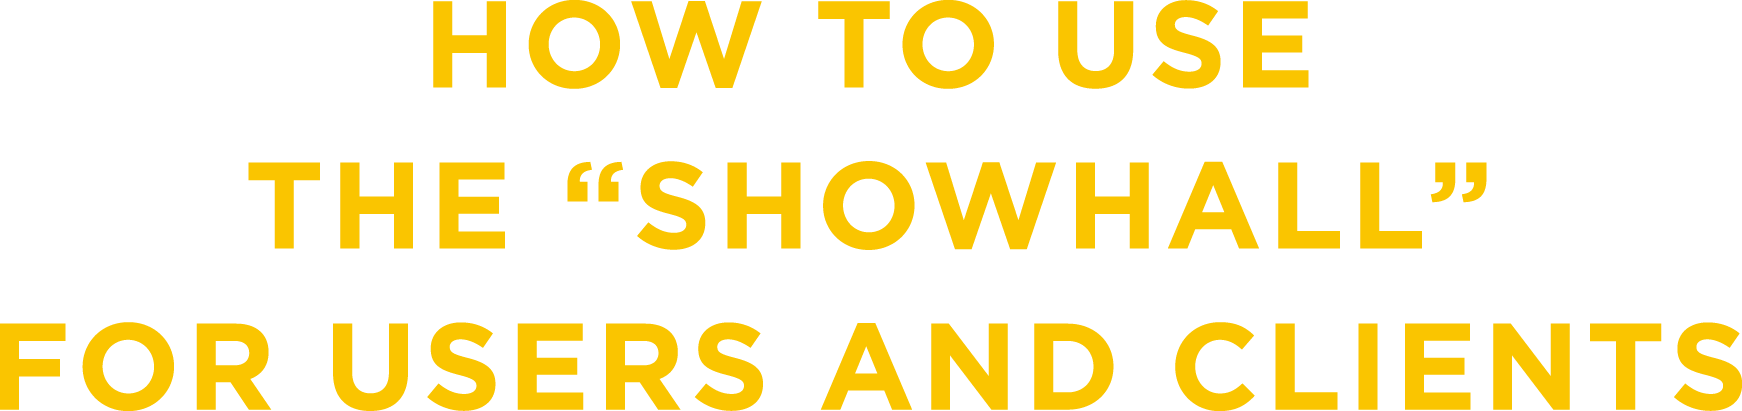 HOW TO USE THE "SHOWHALL" FOR USERS AND CLIENTS